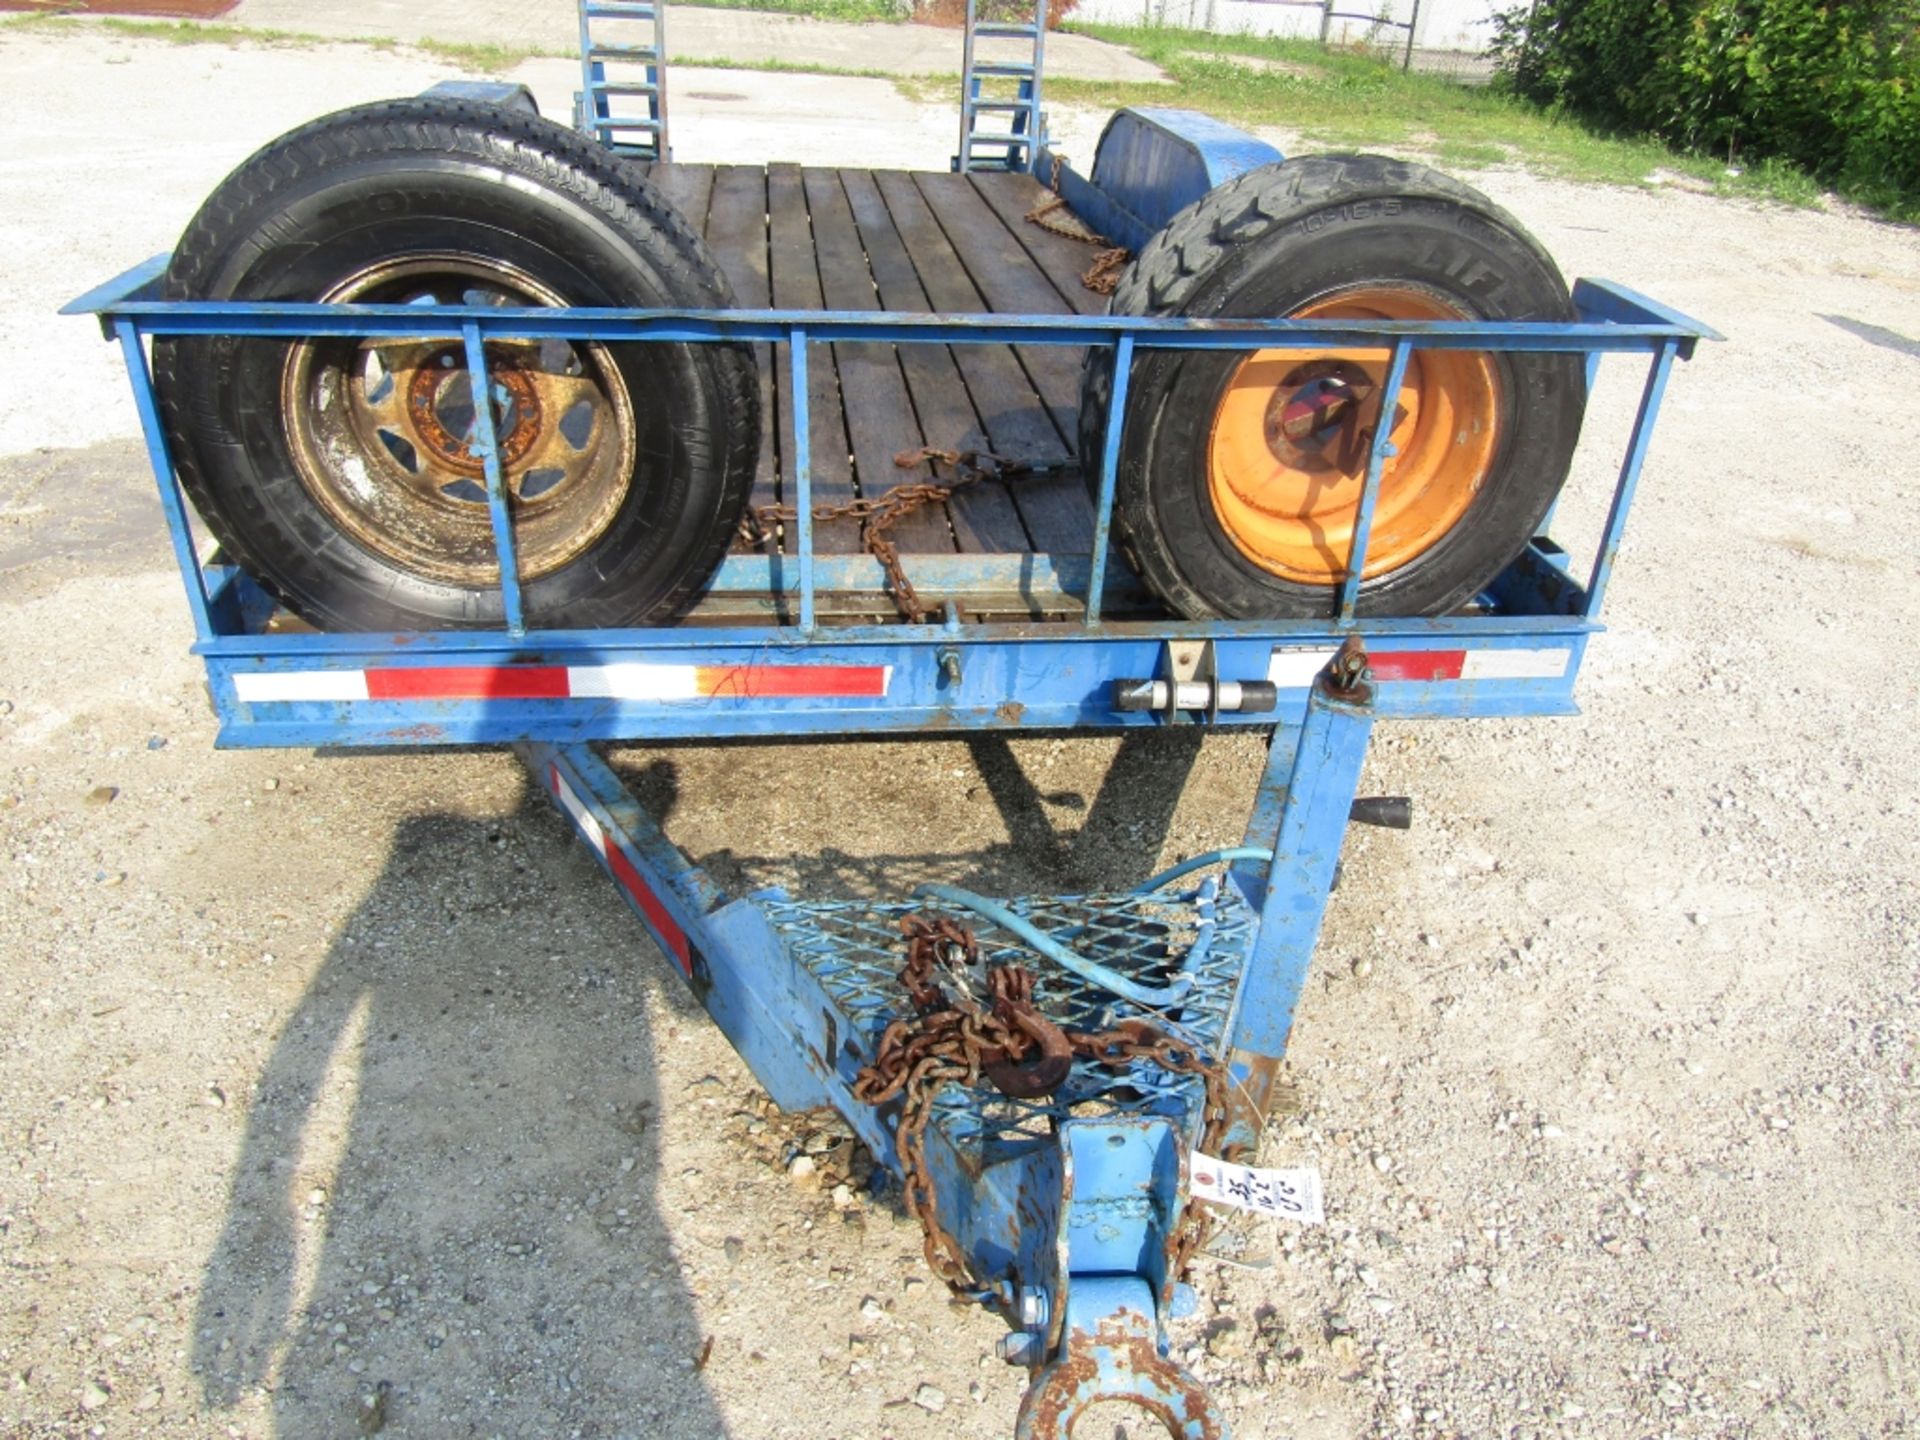 2002 Cronkhite Tandem Axle Trailer, VIN # 47326202621101124, Ramps 16'2" x 6'6", Wood Deck, - Image 3 of 8